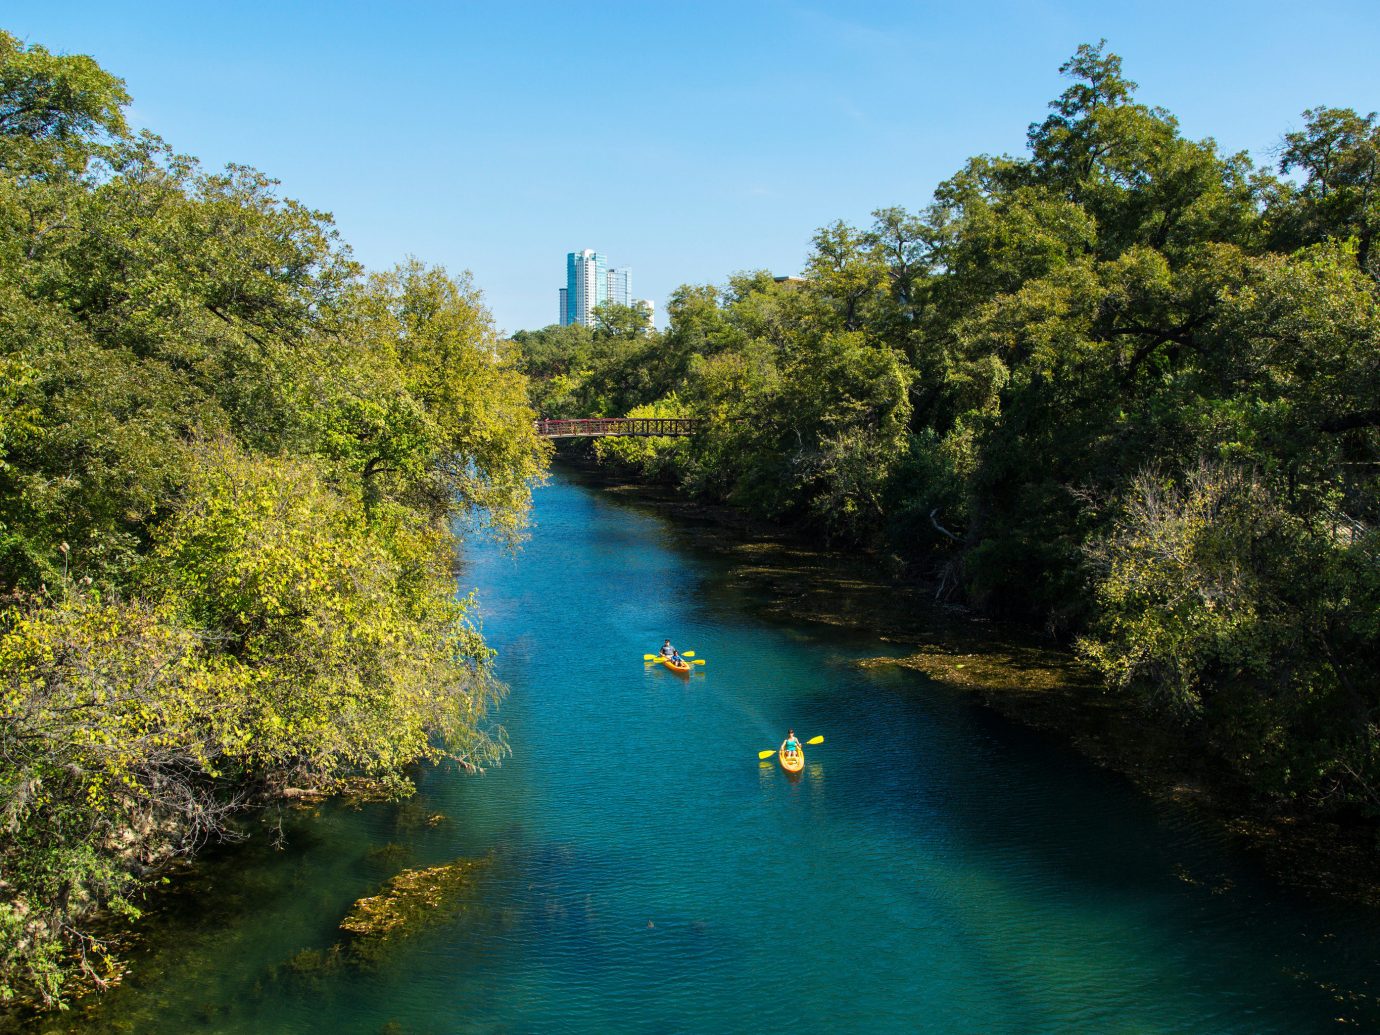 Austin Girls Getaways Texas Trip Ideas Weekend Getaways tree outdoor water sky Nature River landform geographical feature body of water waterway reflection reservoir Lake autumn Canal plant surrounded Forest wooded